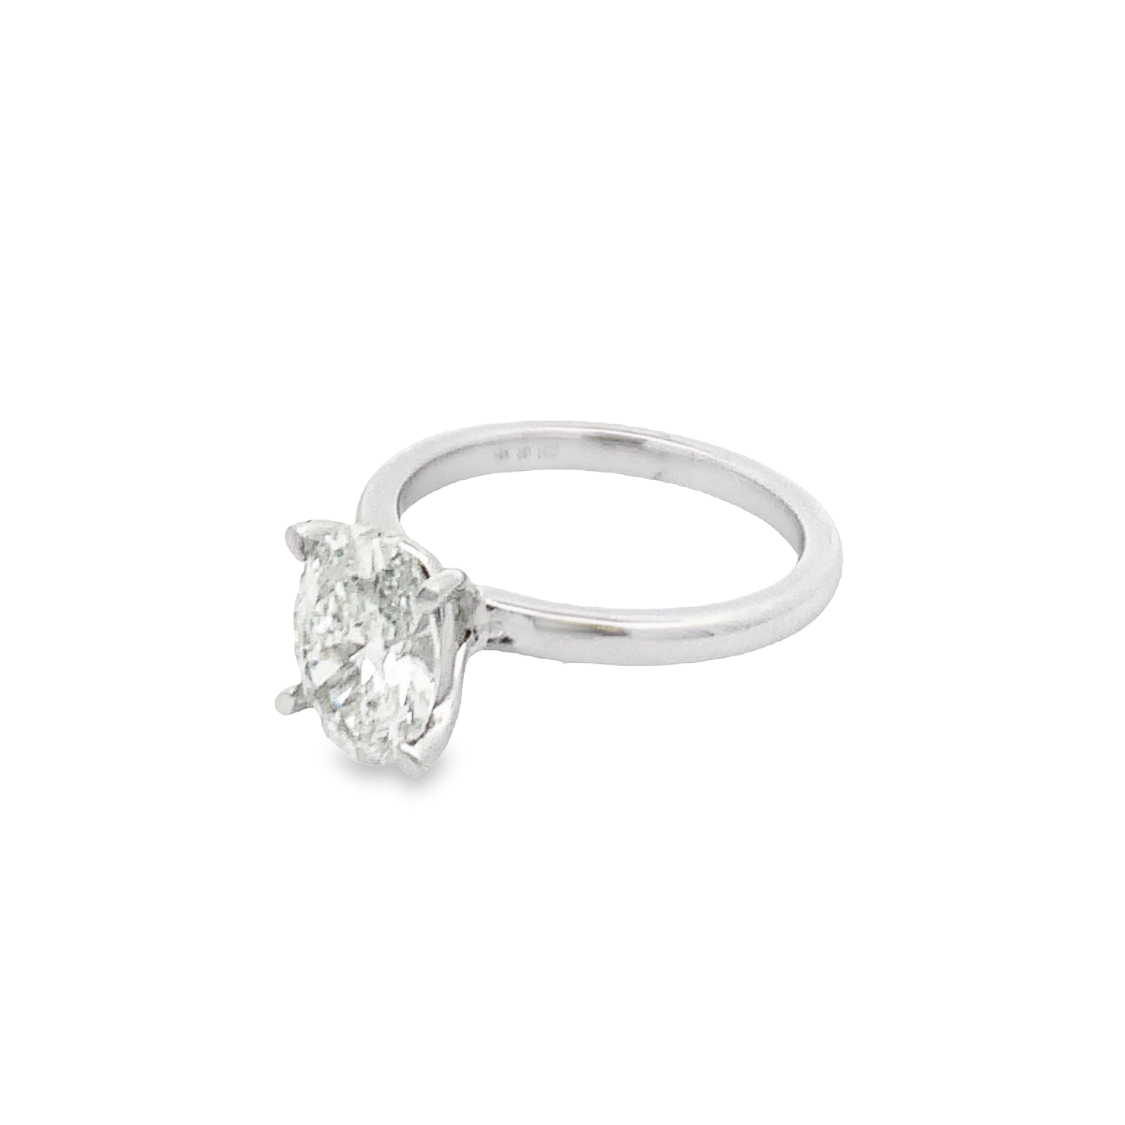 14K White Gold Solitaire Engagement Ring with 1 Lab Grown Oval Cut Diamond 2.06 Cts G VS2 IGI LG542237390